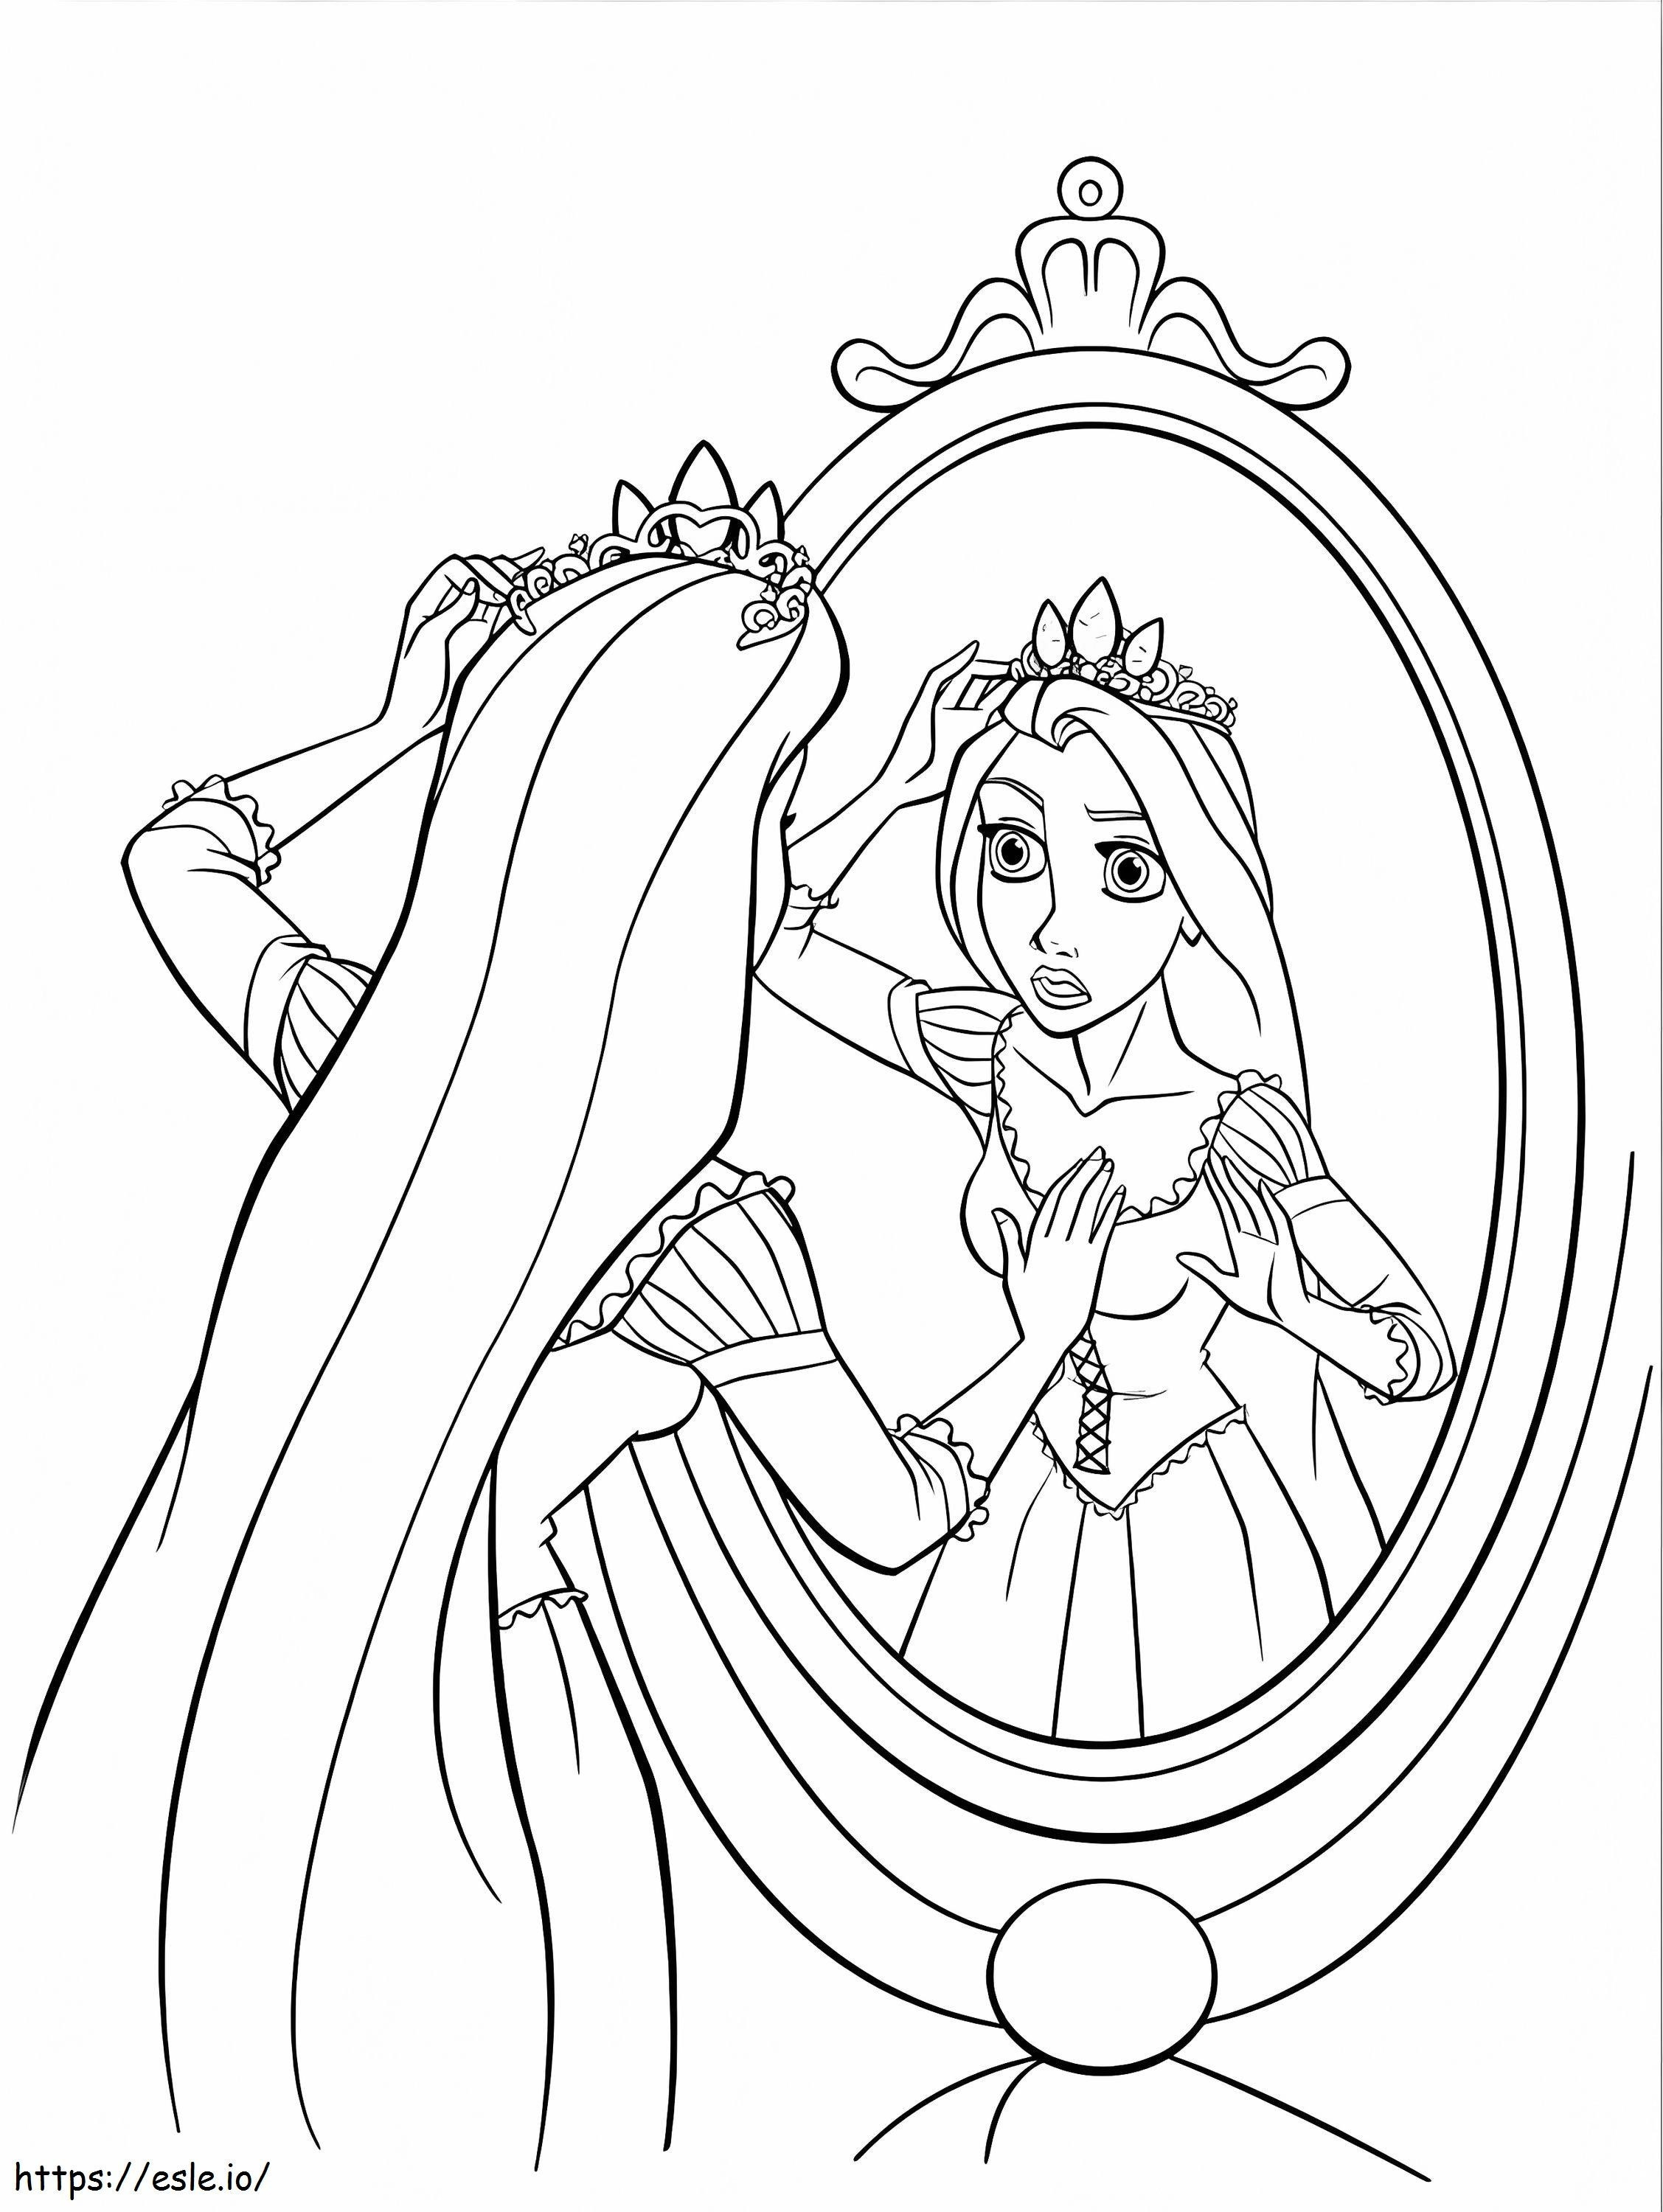 Rapunzel Looked In The Mirror coloring page